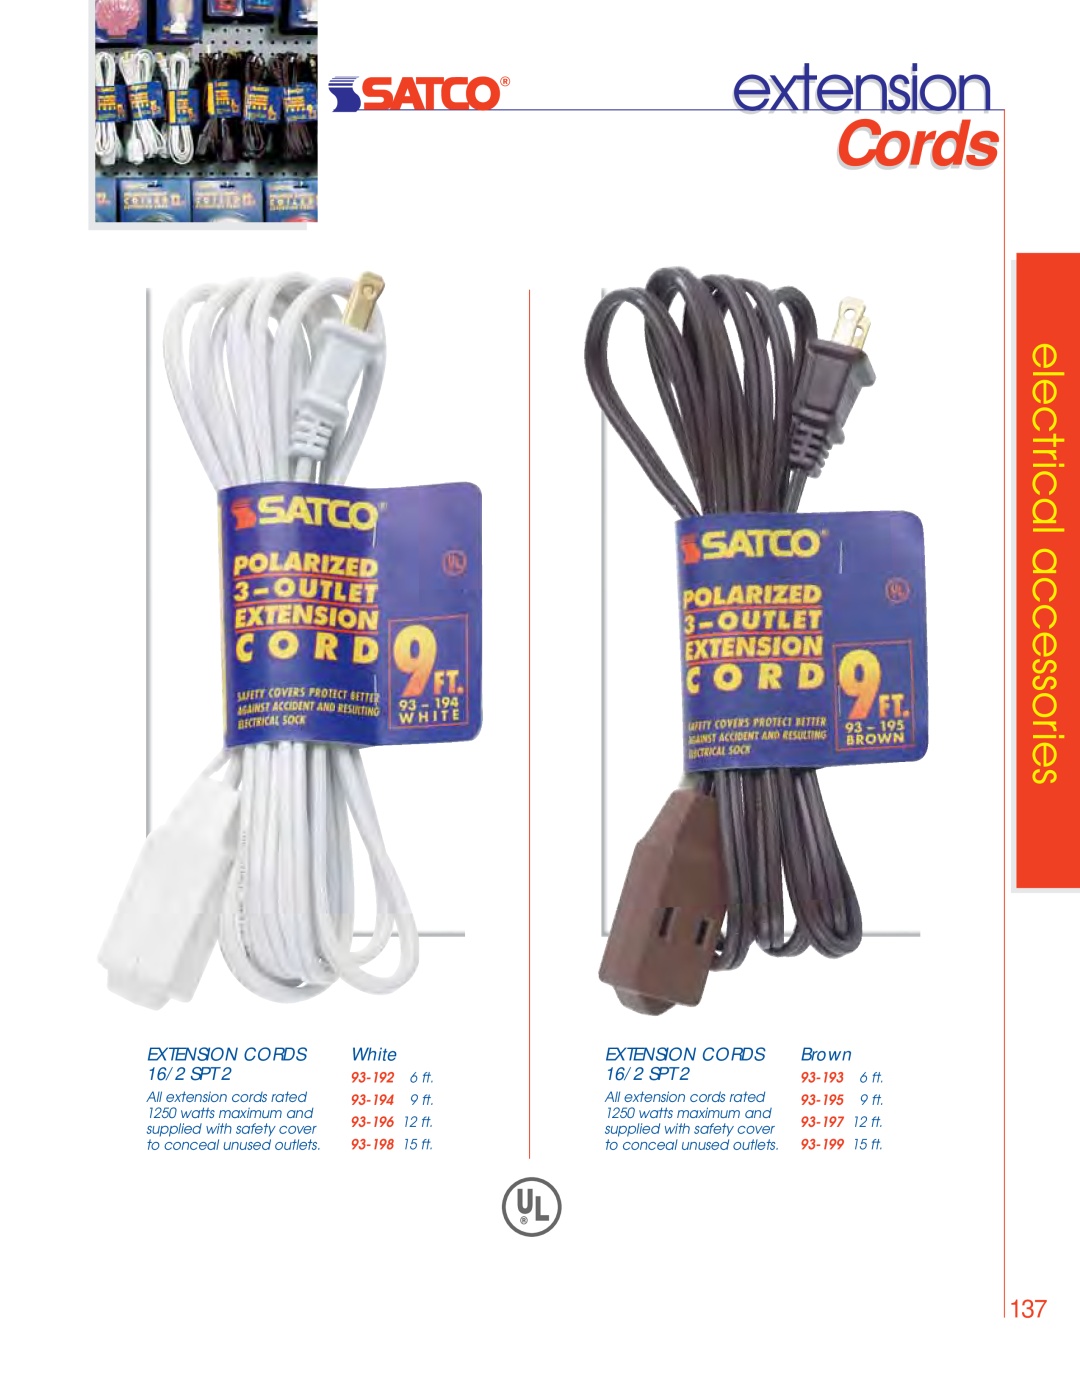 Satco Products 75-046 manual extension, EXTENSION CORDS 16/2 SPT, White, Extension Cords, Brown, electrical accessories 